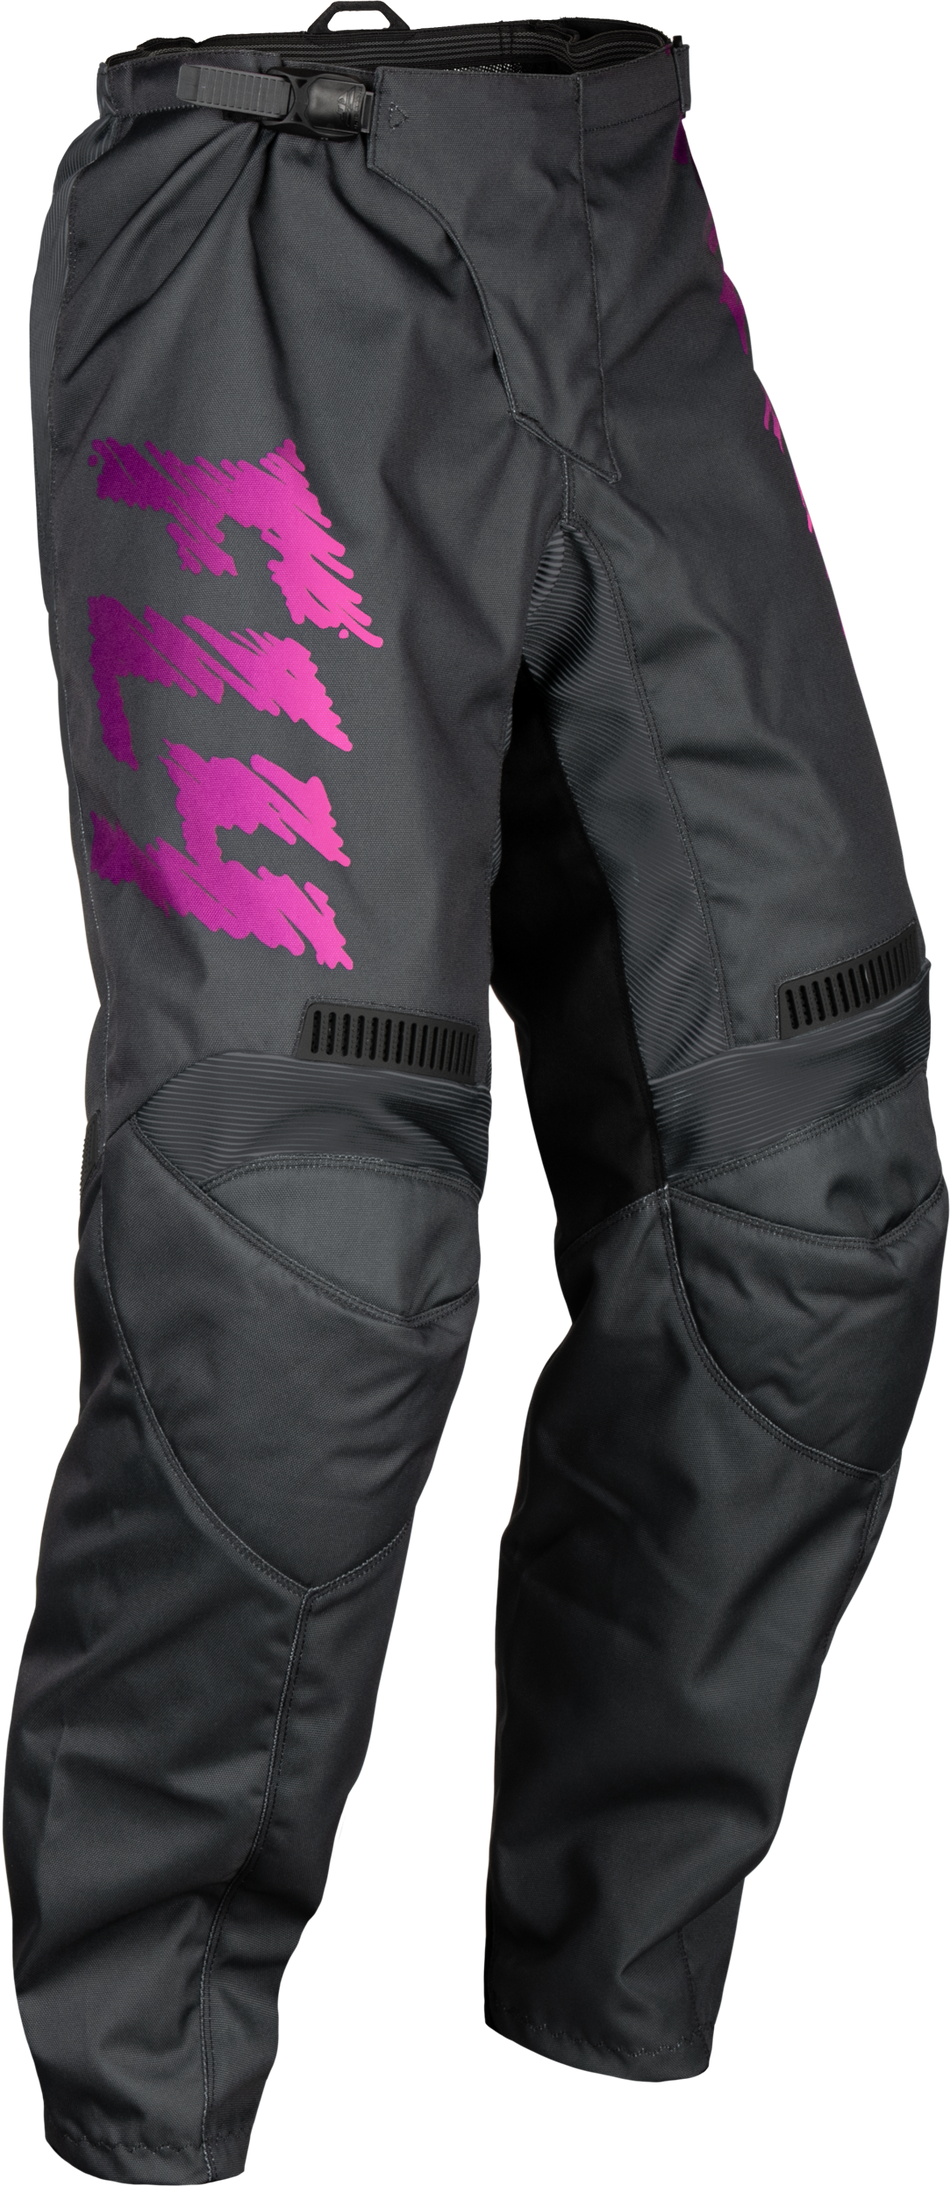 FLY RACING Youth F-16 Pants Grey/Charcoal/Pink Sz 26 377-23026